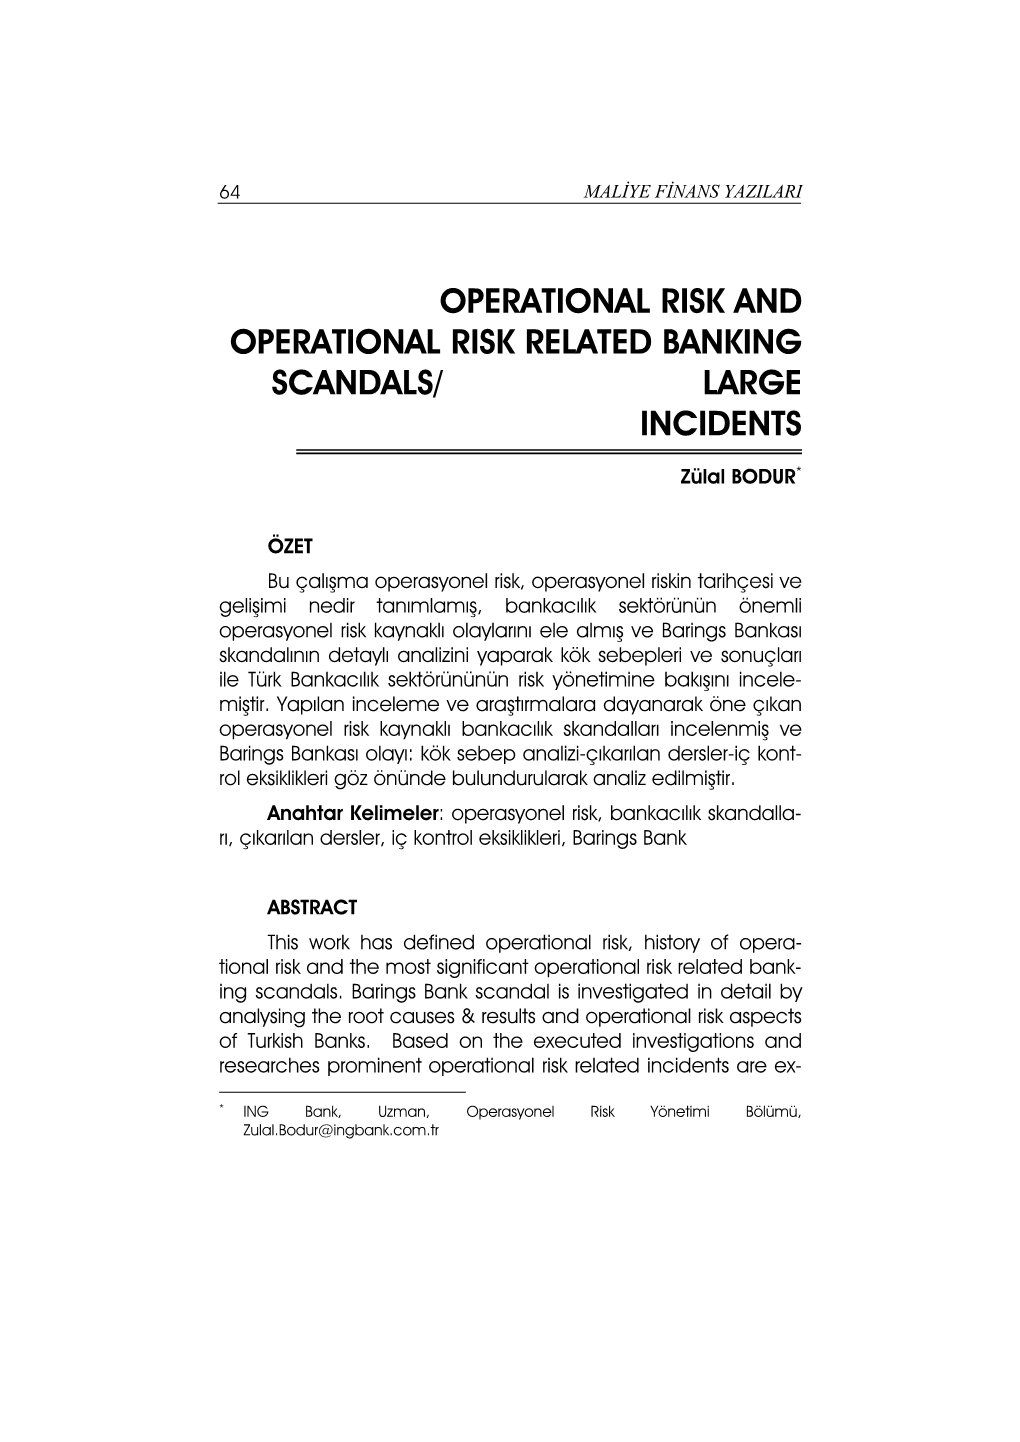 Operational Risk and Operational Risk Related Banking Scandals/ Large Incidents